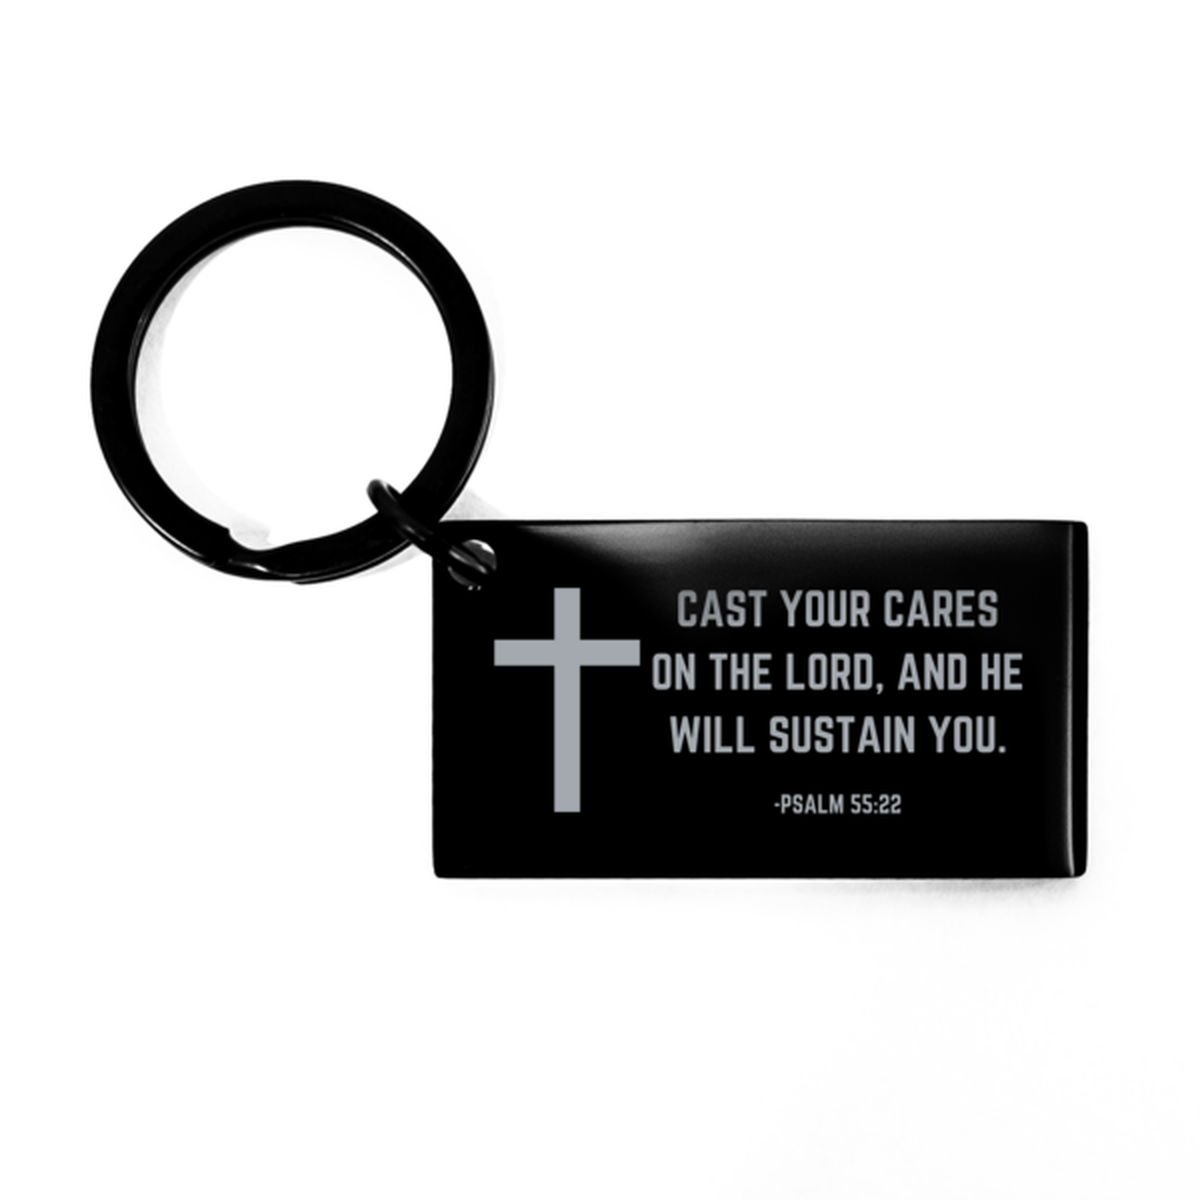 Baptism Gifts For Teenage Boys Girls, Christian Bible Verse Black Keychain, Cast your cares on the Lord, Confirmation Gifts, Bible Verse Keyring for Son, Godson, Grandson, Nephew